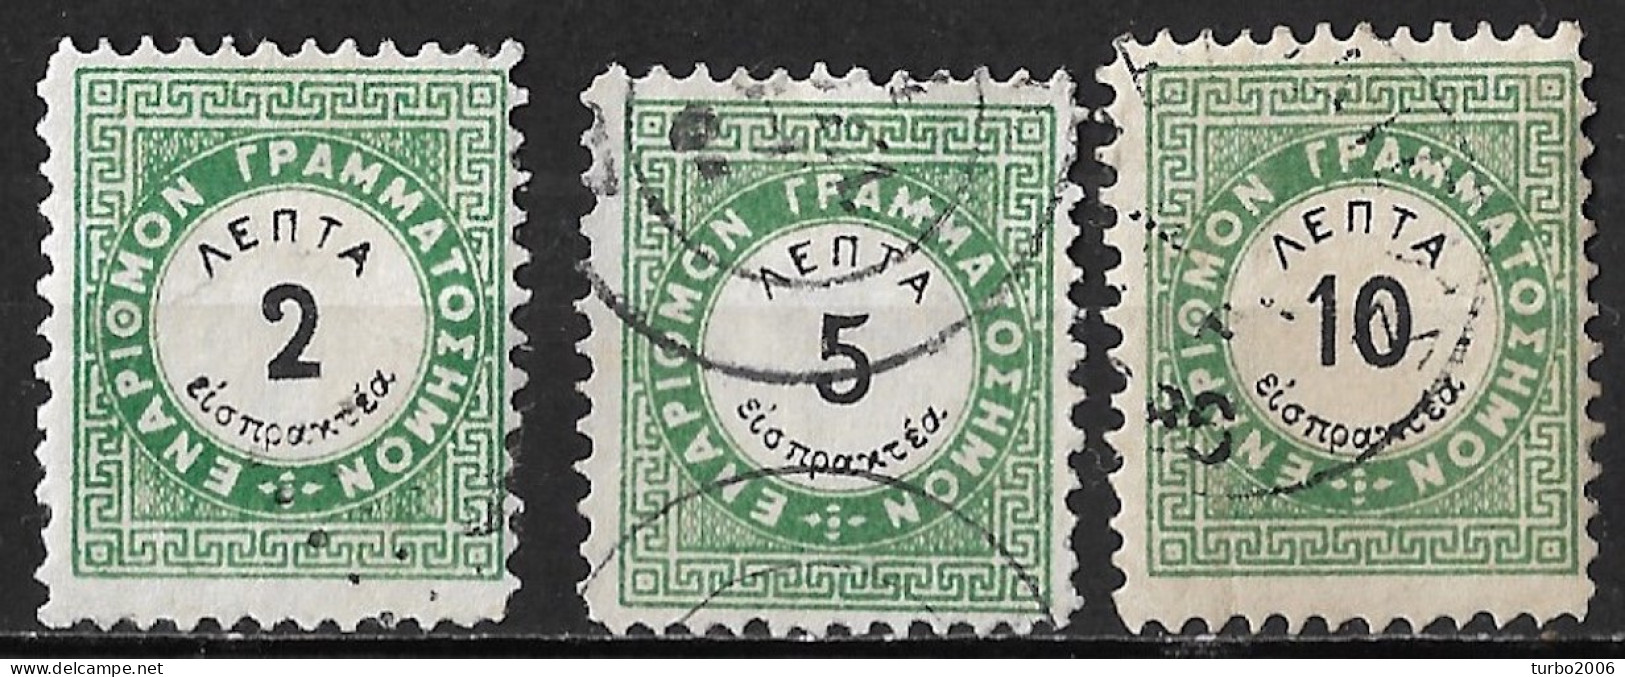 GREECE 1875 Postage Due Vienna Issue I Small Capitals 2-5-10 L. Green / Black Perforation 10½ Vl. D 2 A - D 3 A - D 4 A - Used Stamps